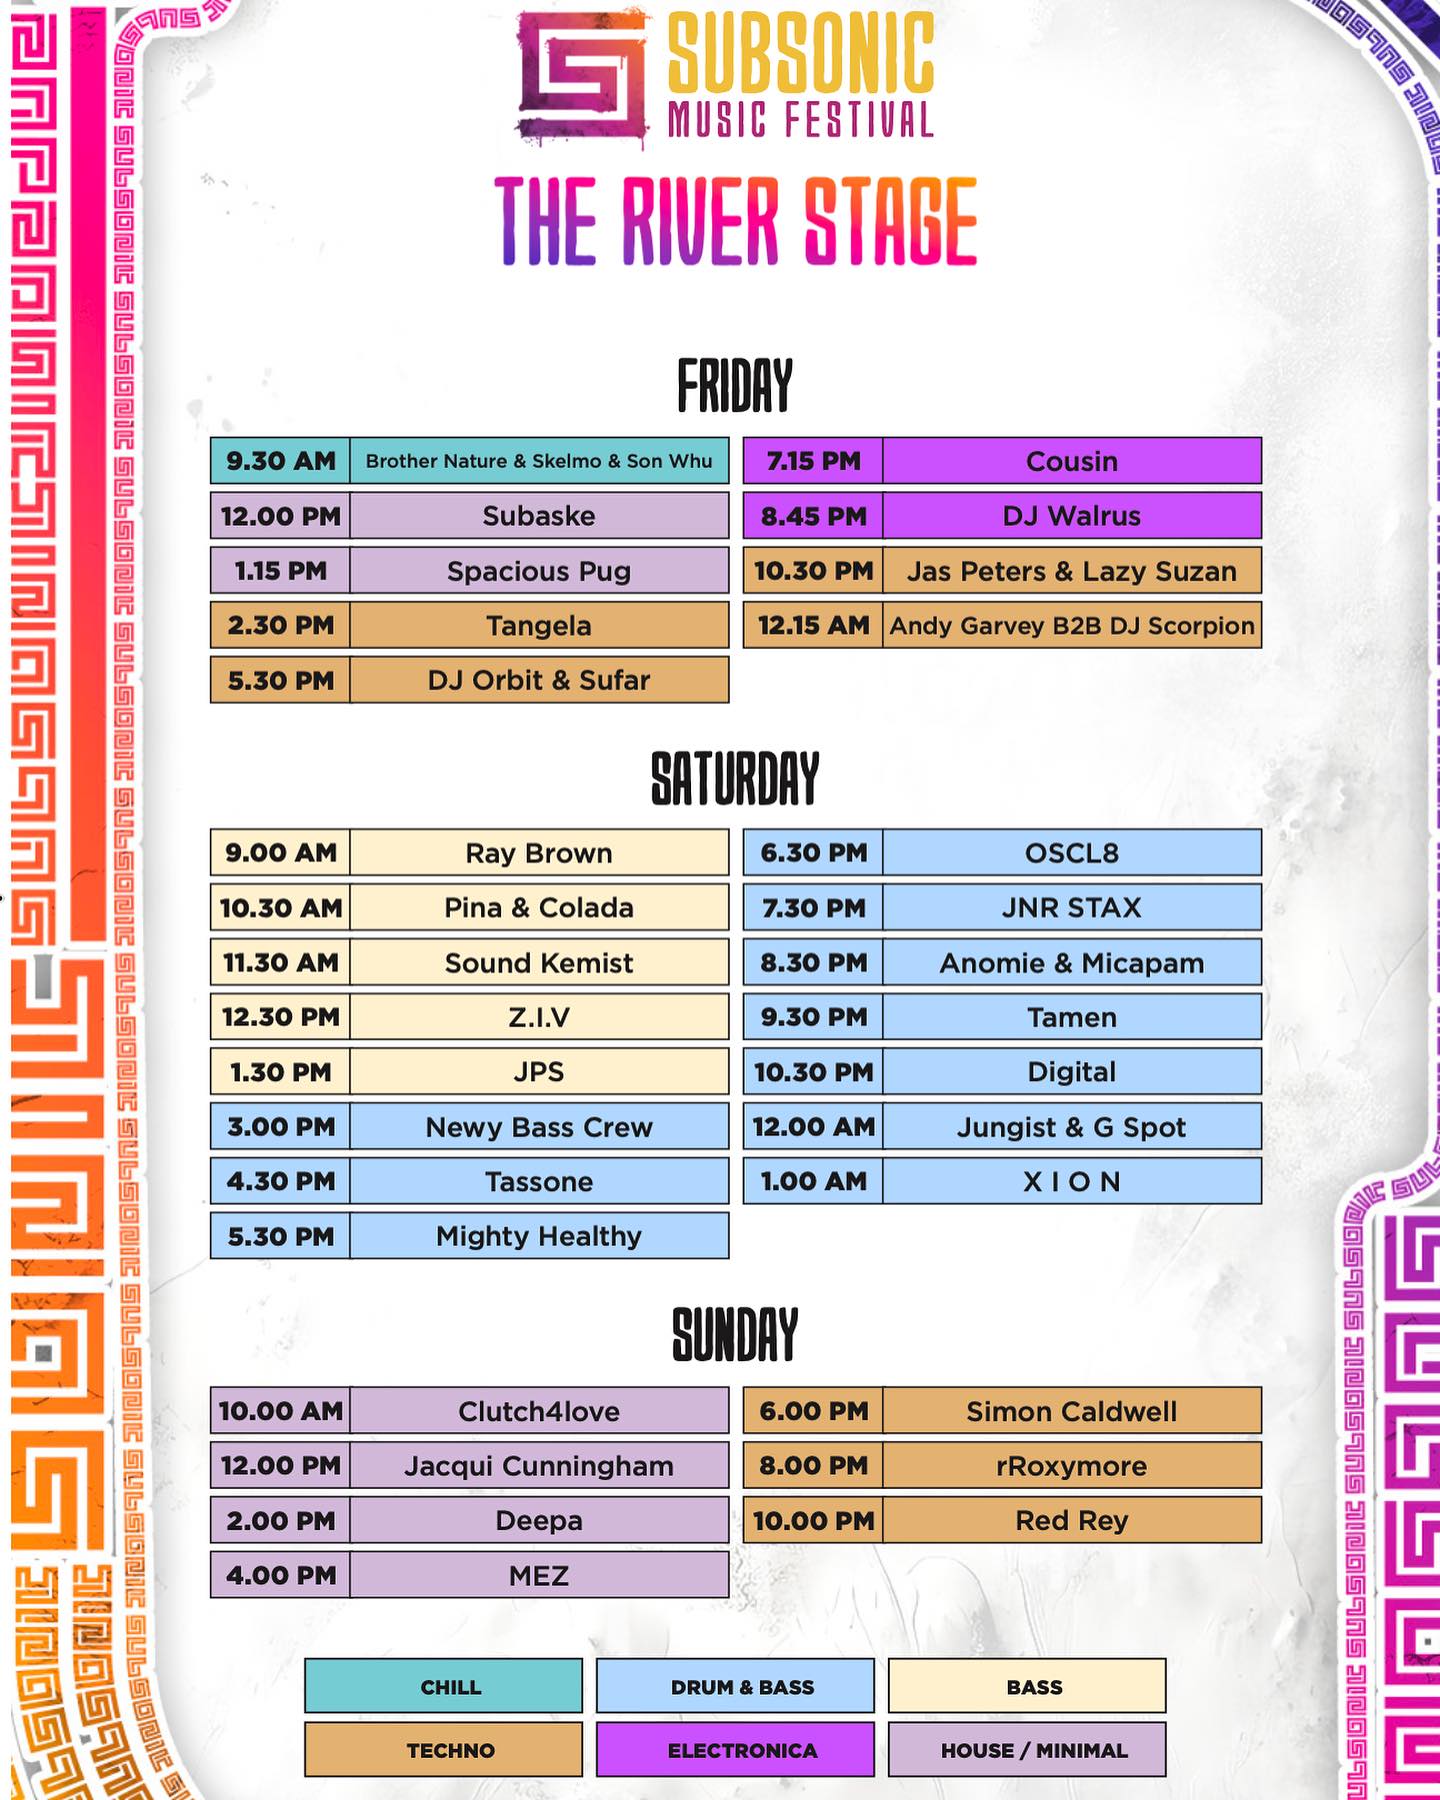 The River Stage